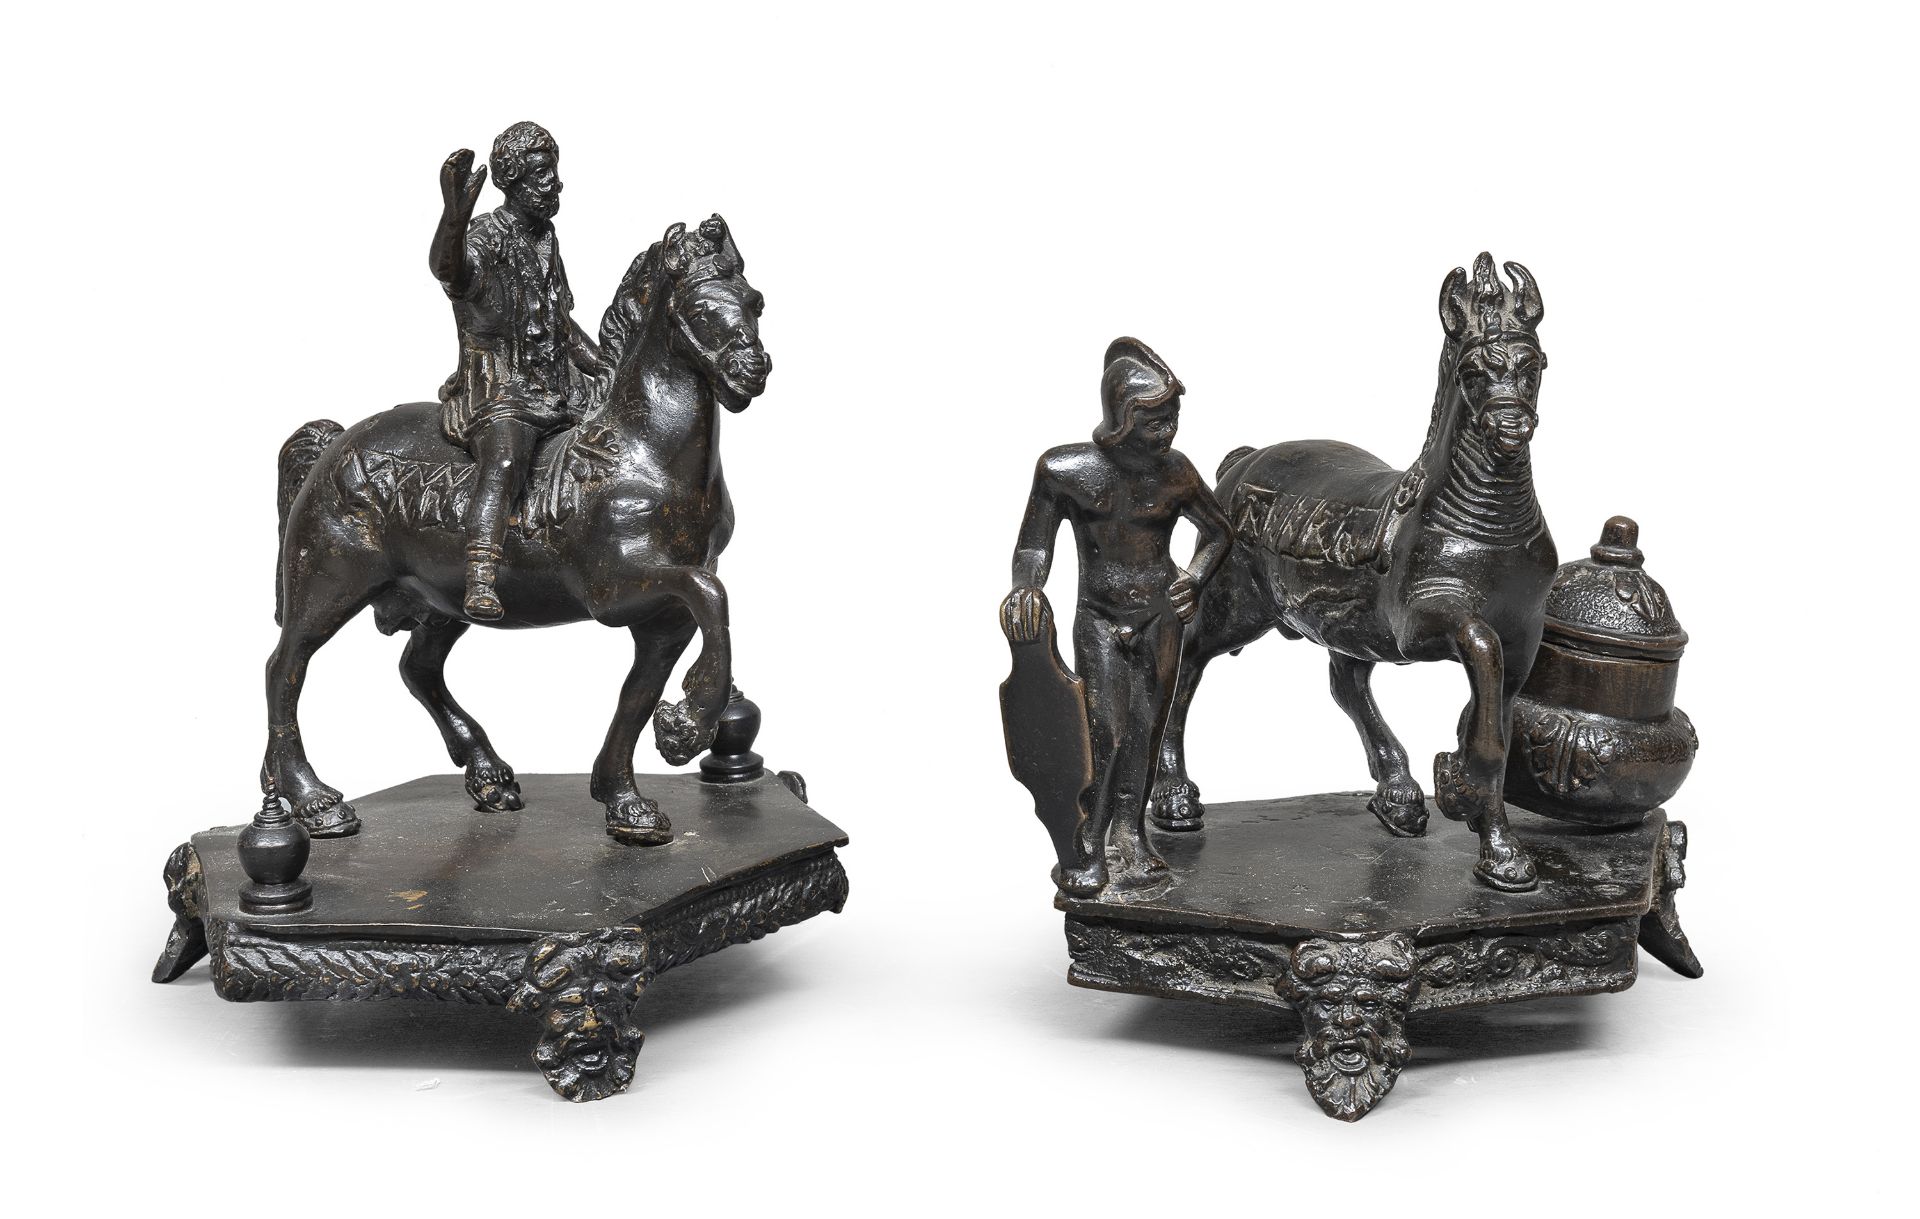 PAIR OF BRONZE SCULPTURES BY THE CIRCLE OF SEVERO CALZETTA FROM RAVENNA